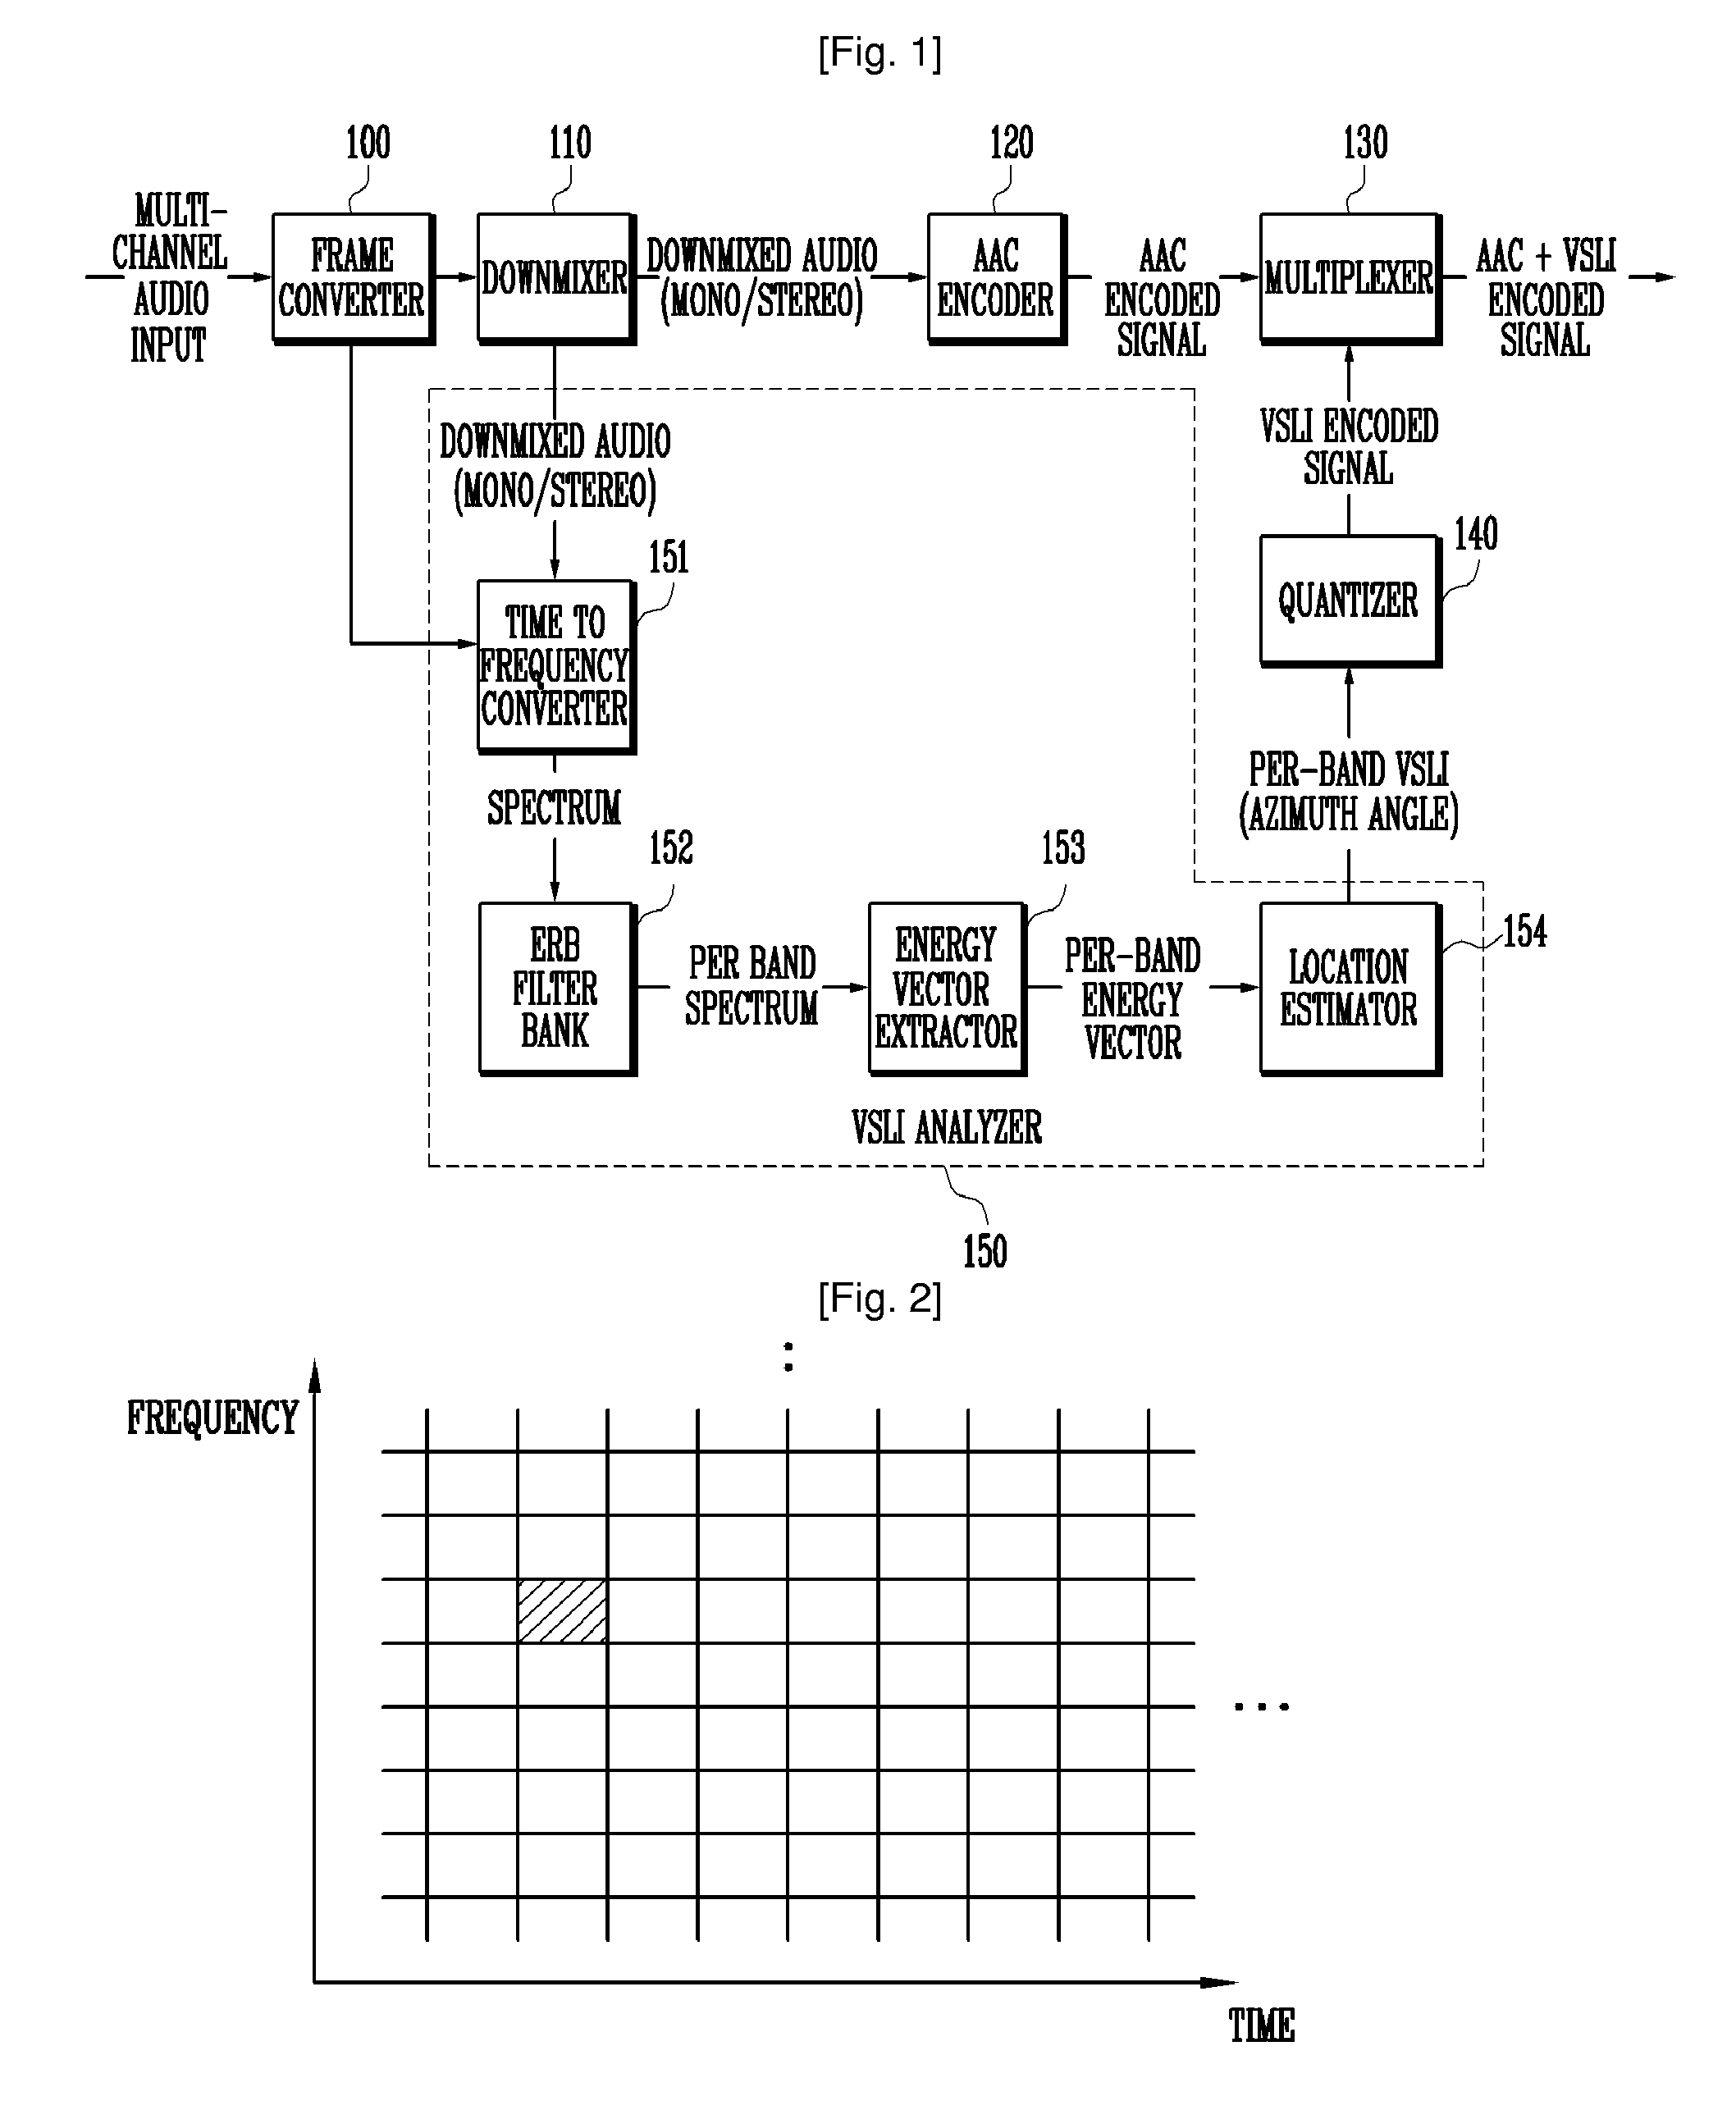 Method And Apparatus For Encoding And Decoding Multi-Channel Audio Signal Using Virtual Source Location Information